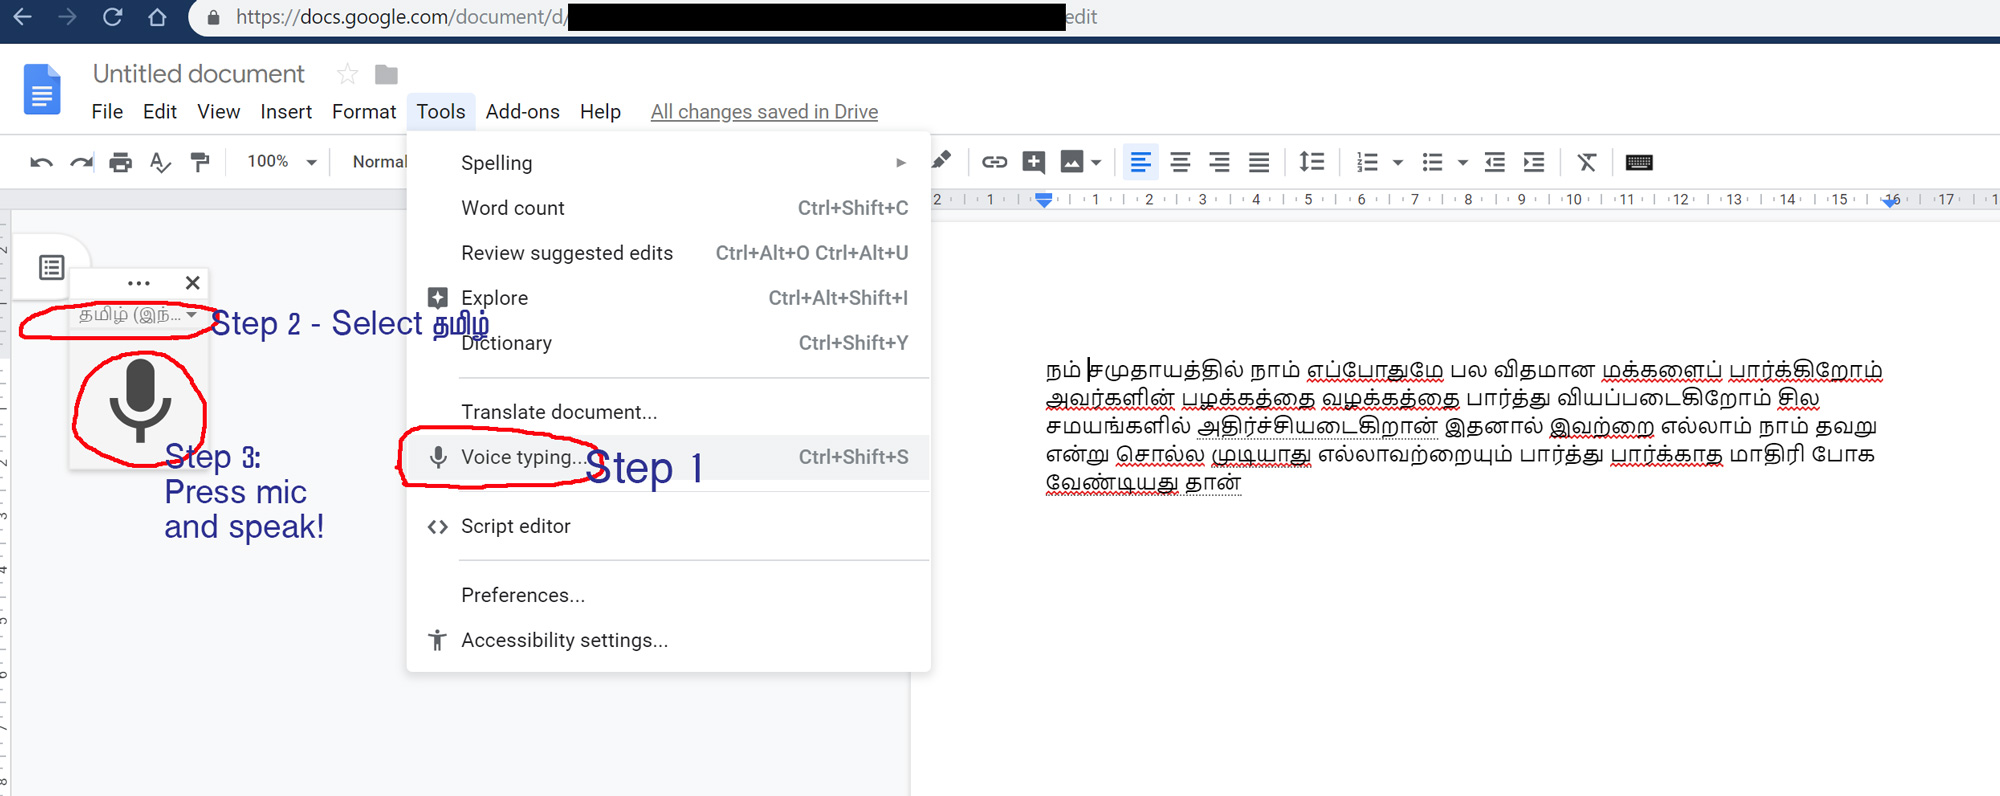 Google Voice Typing in Tamil on your PC / Mac - Just use Google Docs